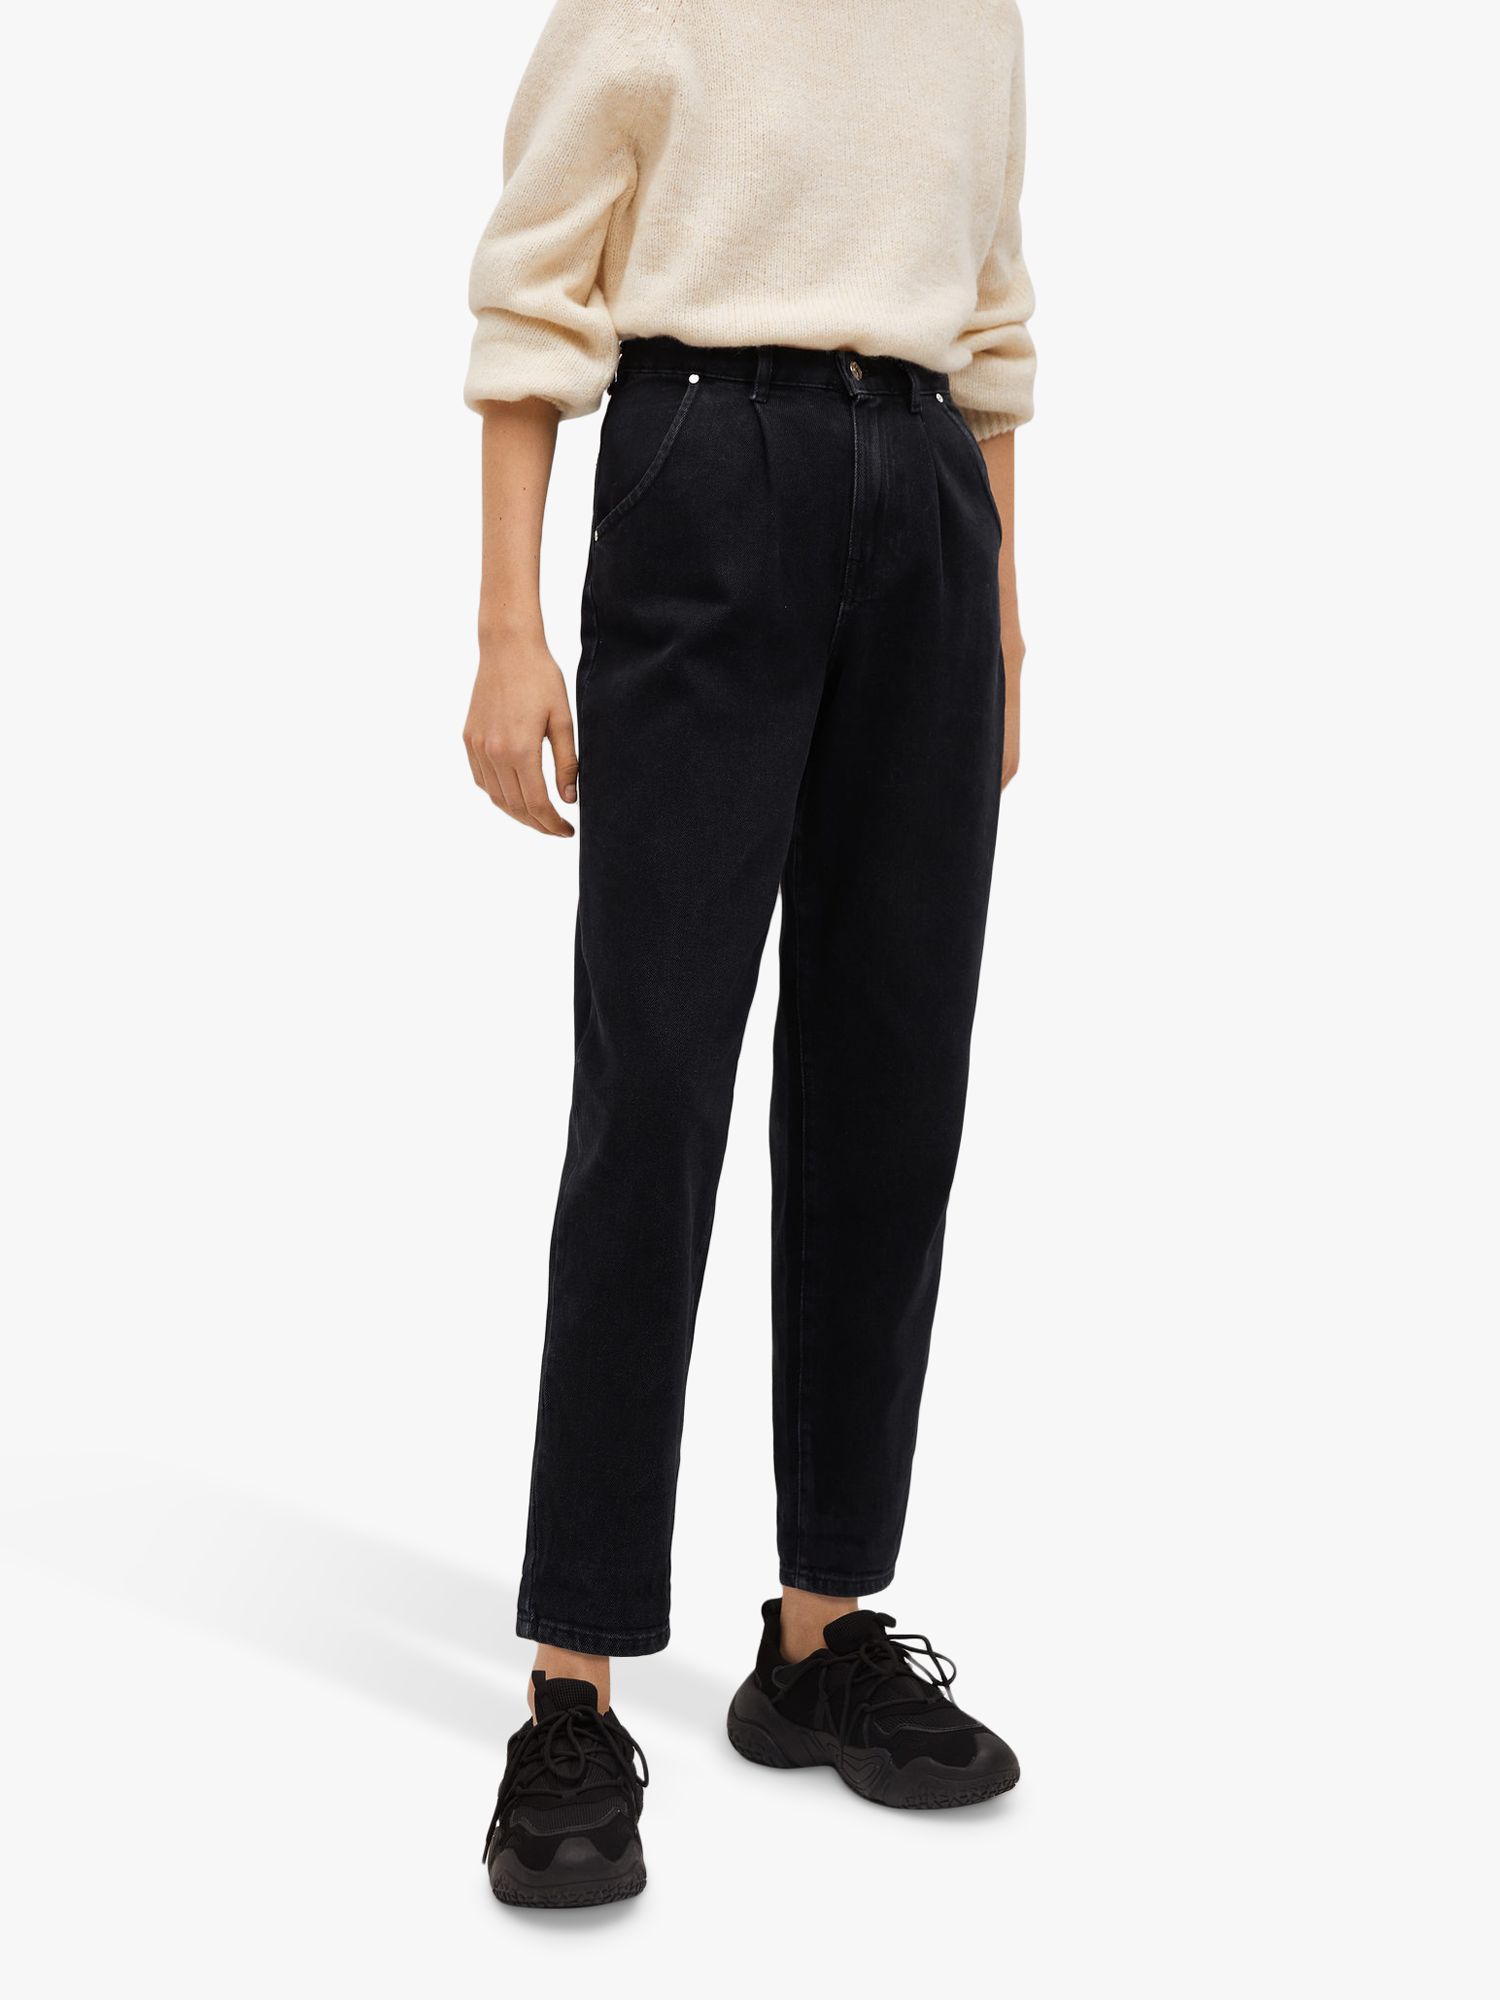 Mango Darted Slouch Fit Jeans, Black at John Lewis & Partners